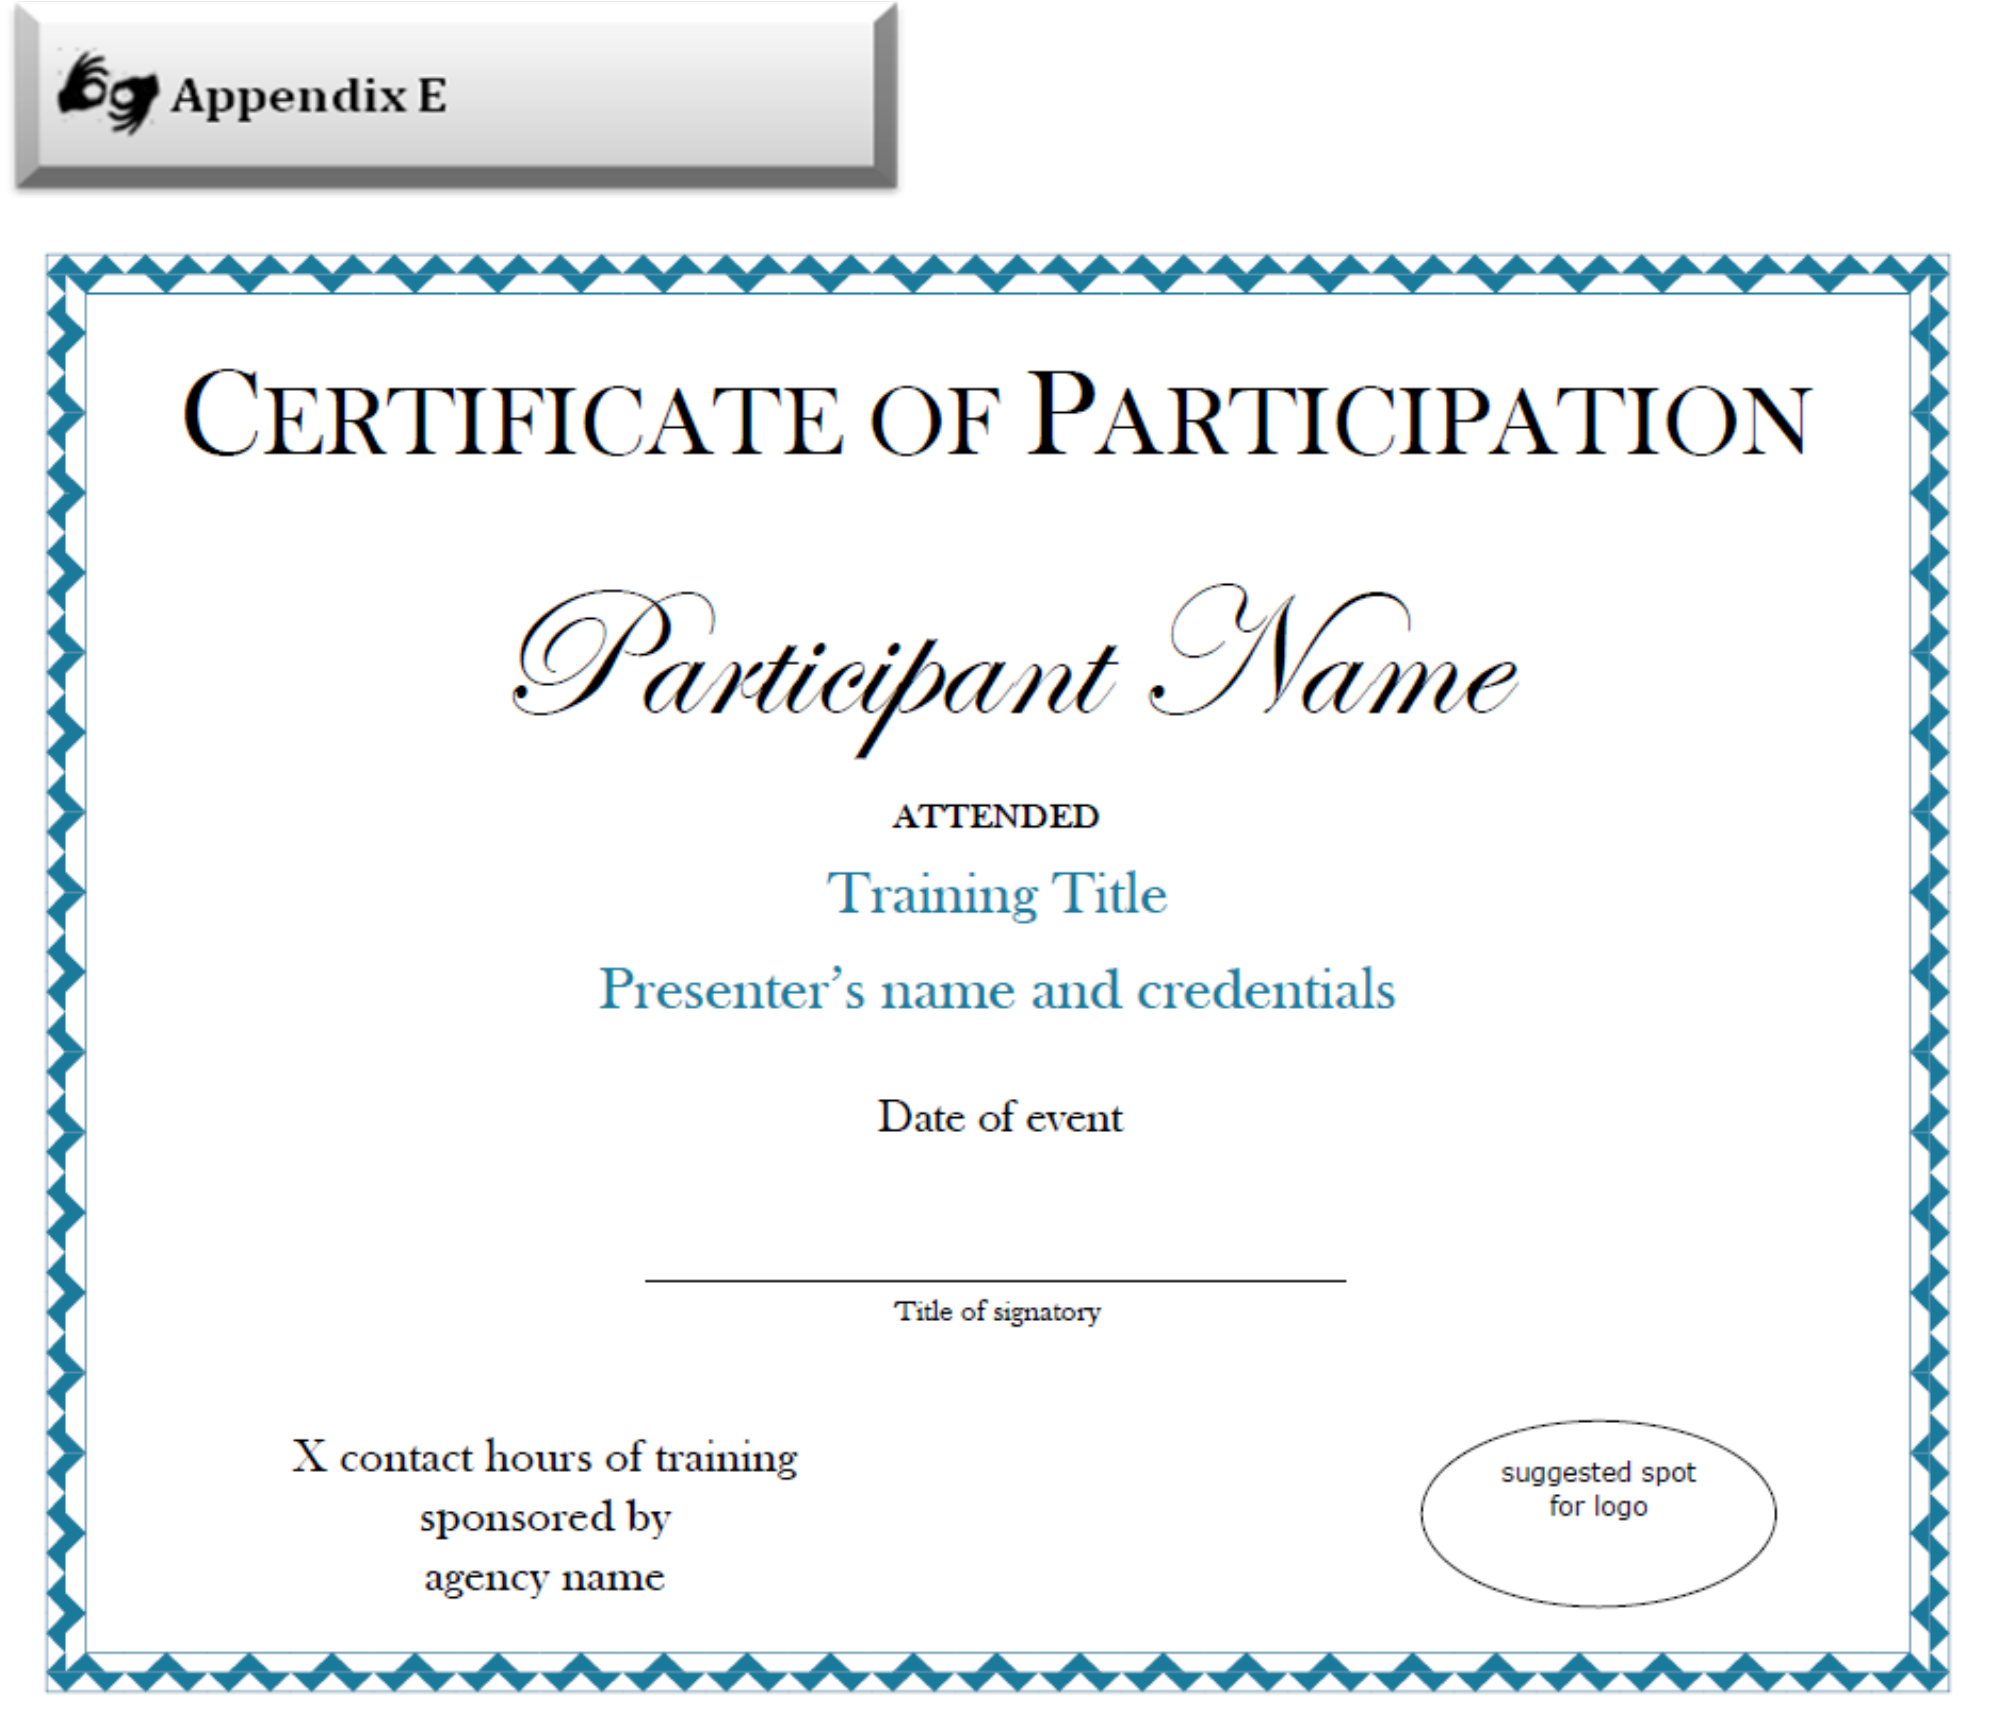 Certificate Of Participation Sample Free Download With Certification Of Participation Free Template